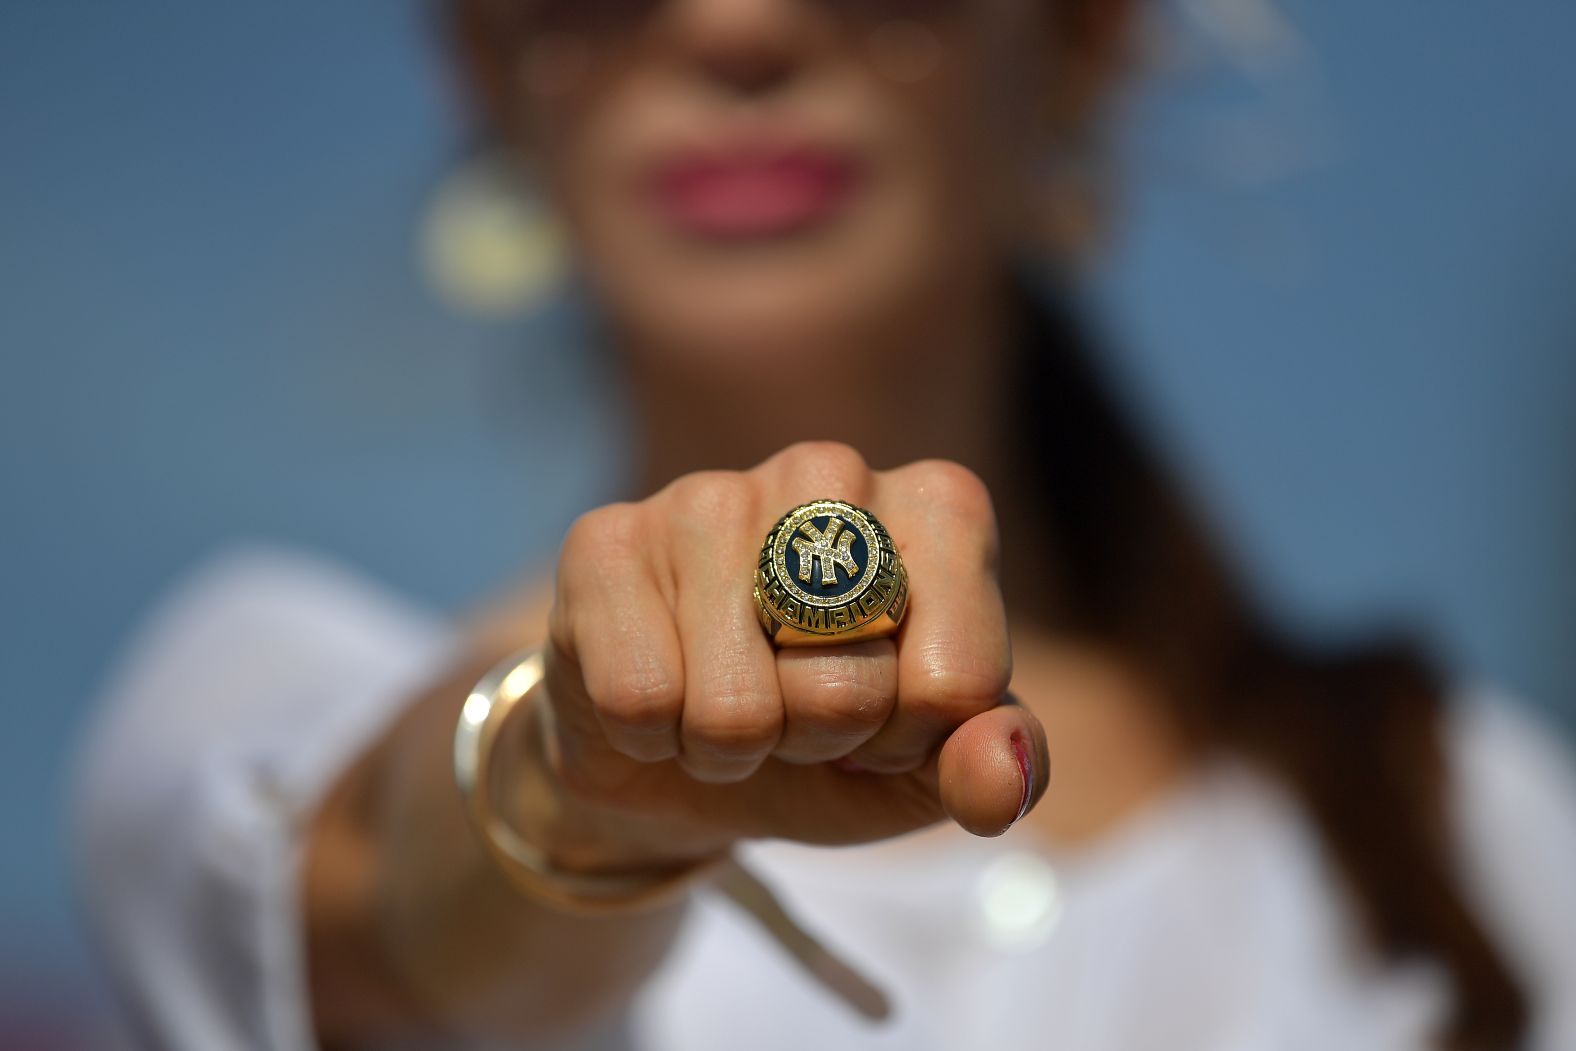  A New York Yankees fan shows of her Yankees ring ahead of game one of the MLB London Series on June 29.